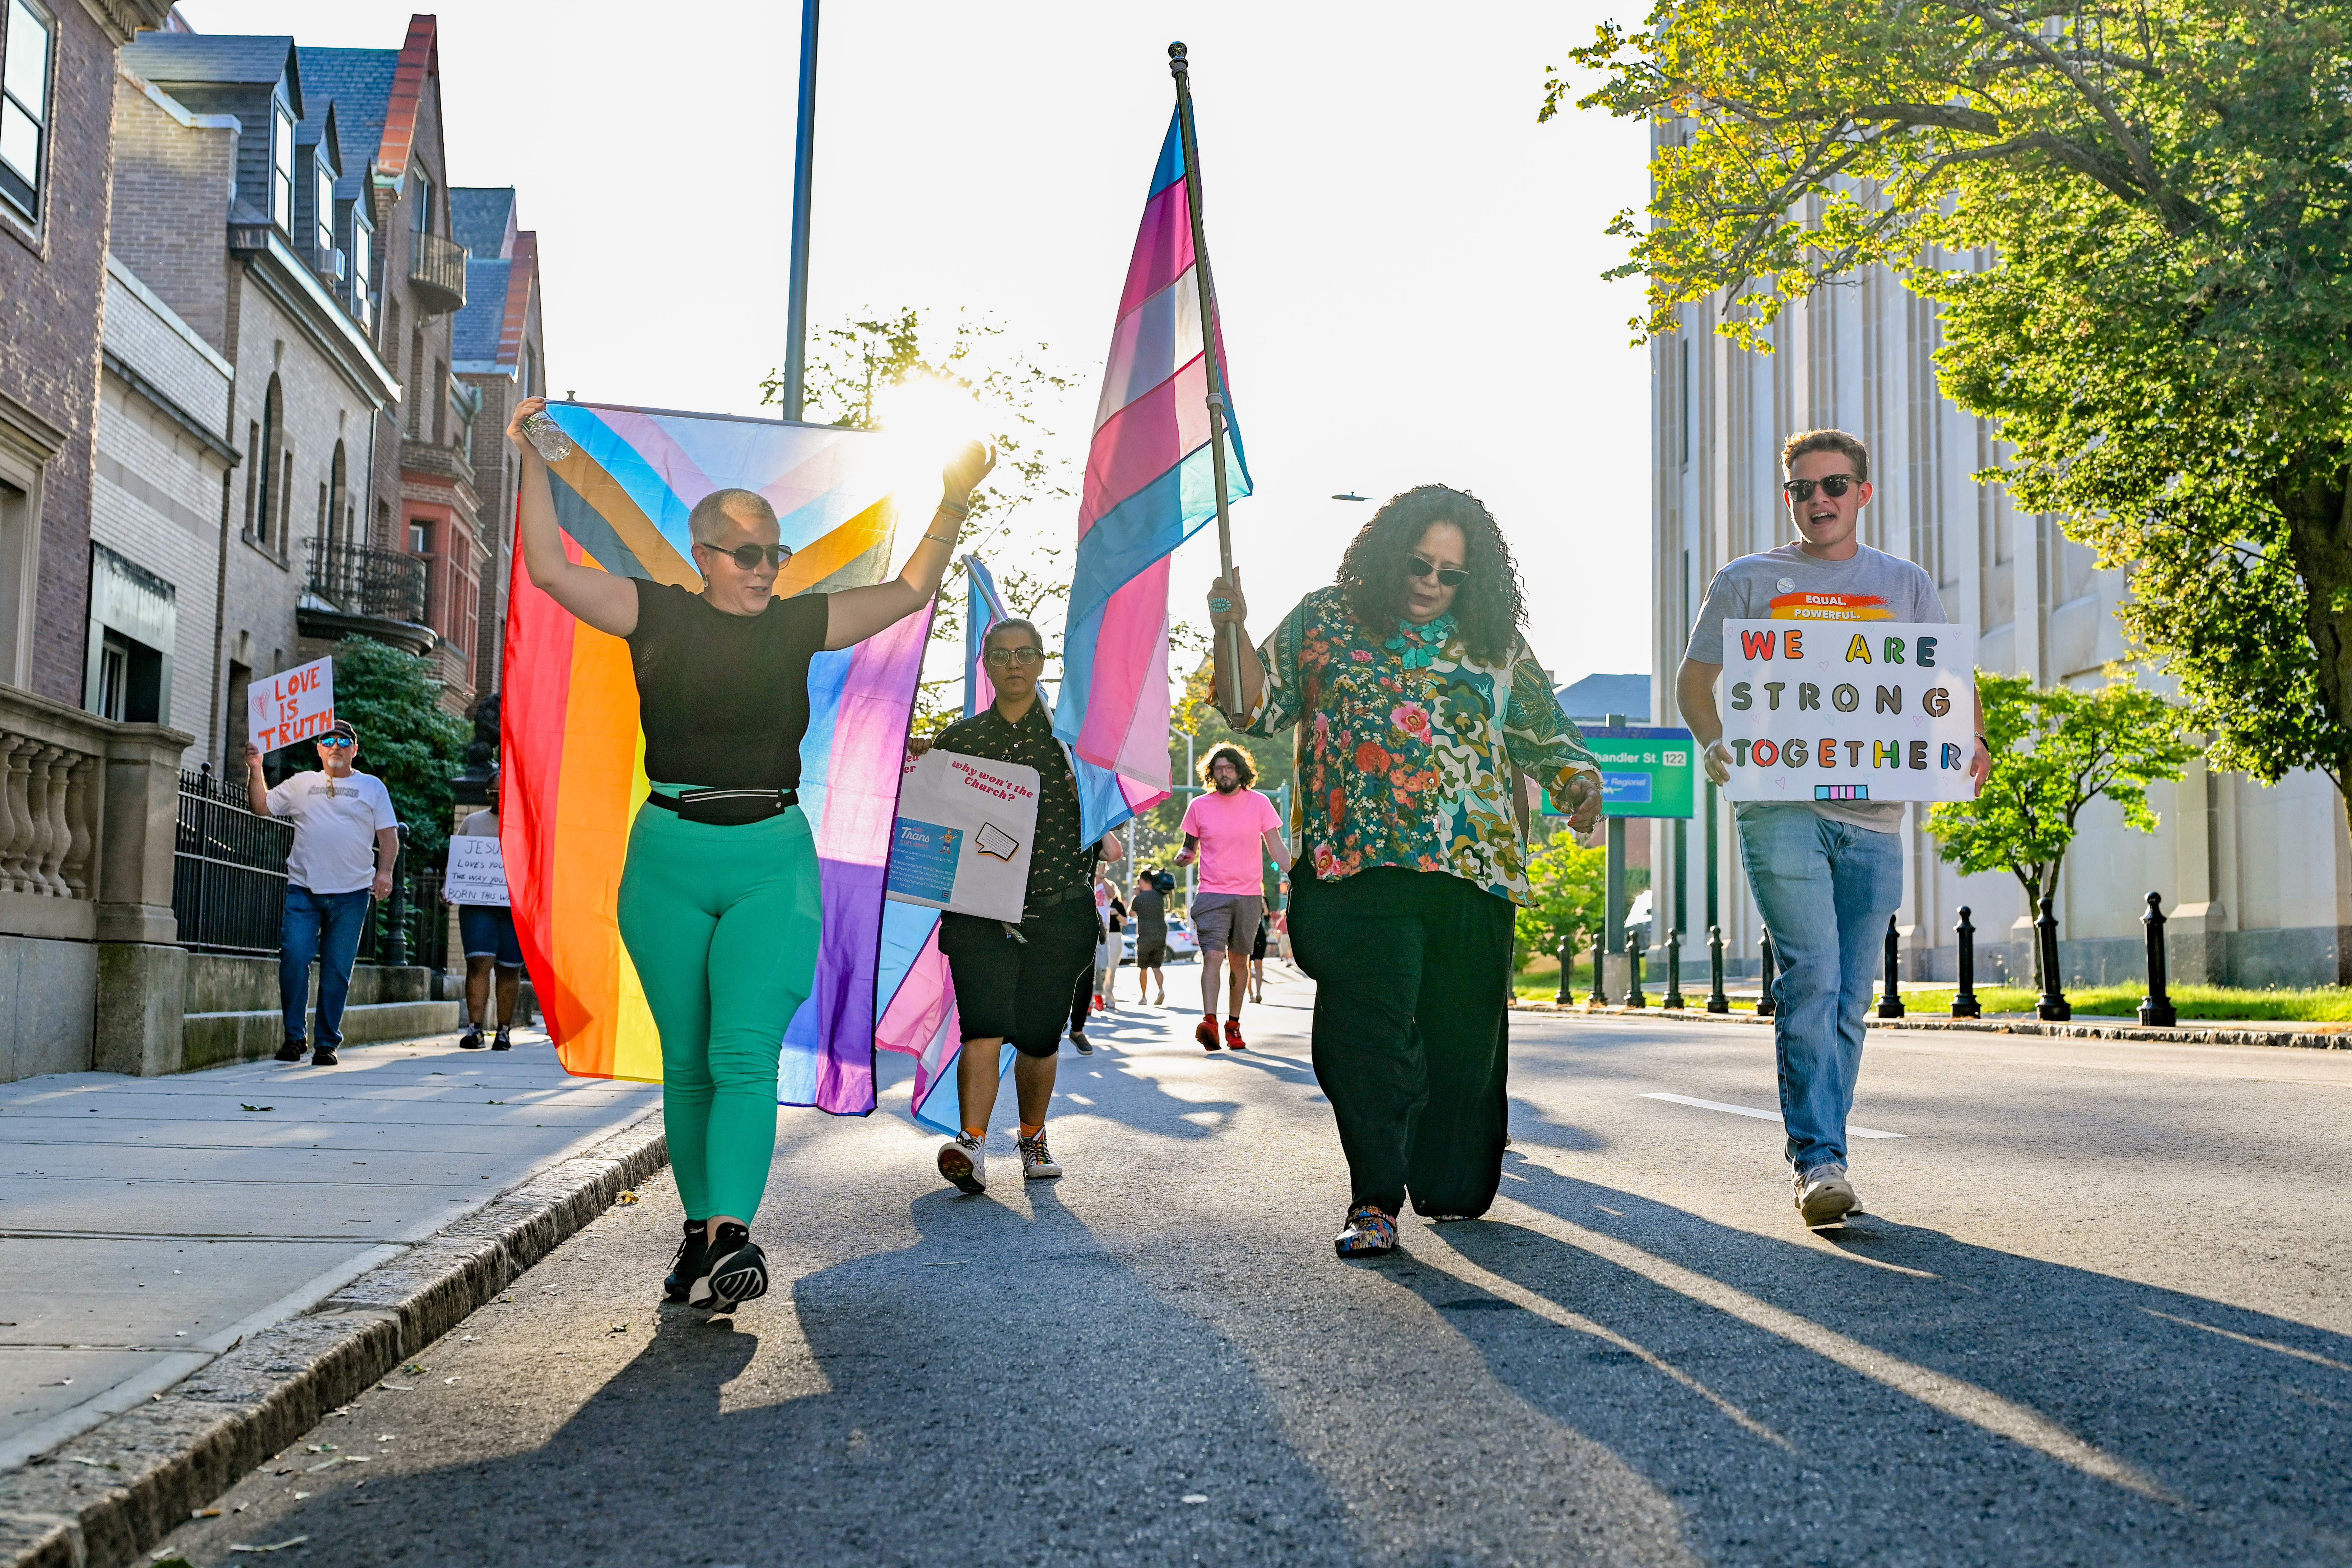 LGBTQ+ community, advocates protest Diocese of Worcester gender policy